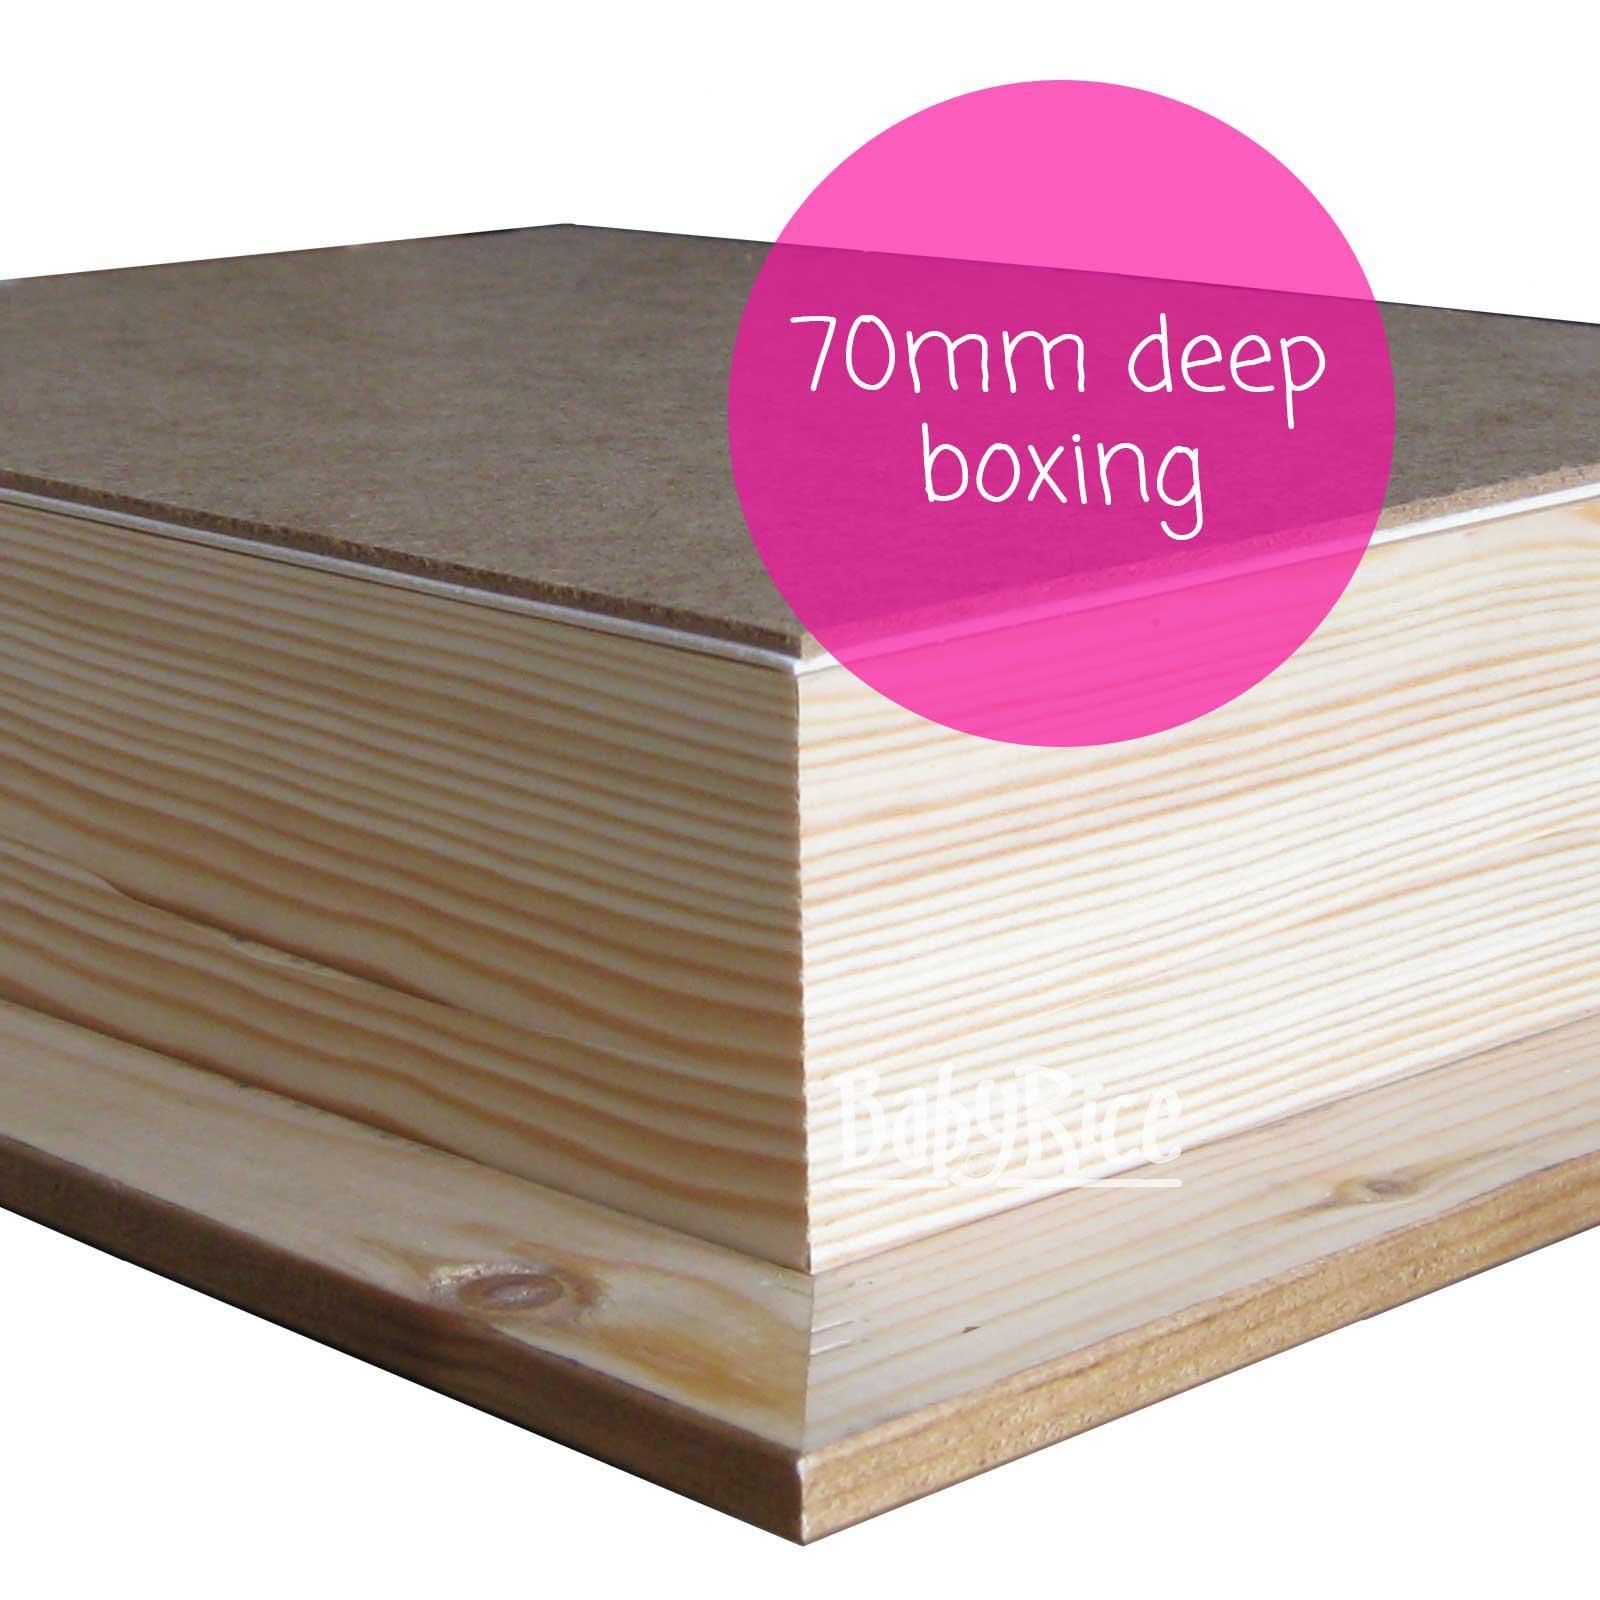 Example of rear pine box 70mm